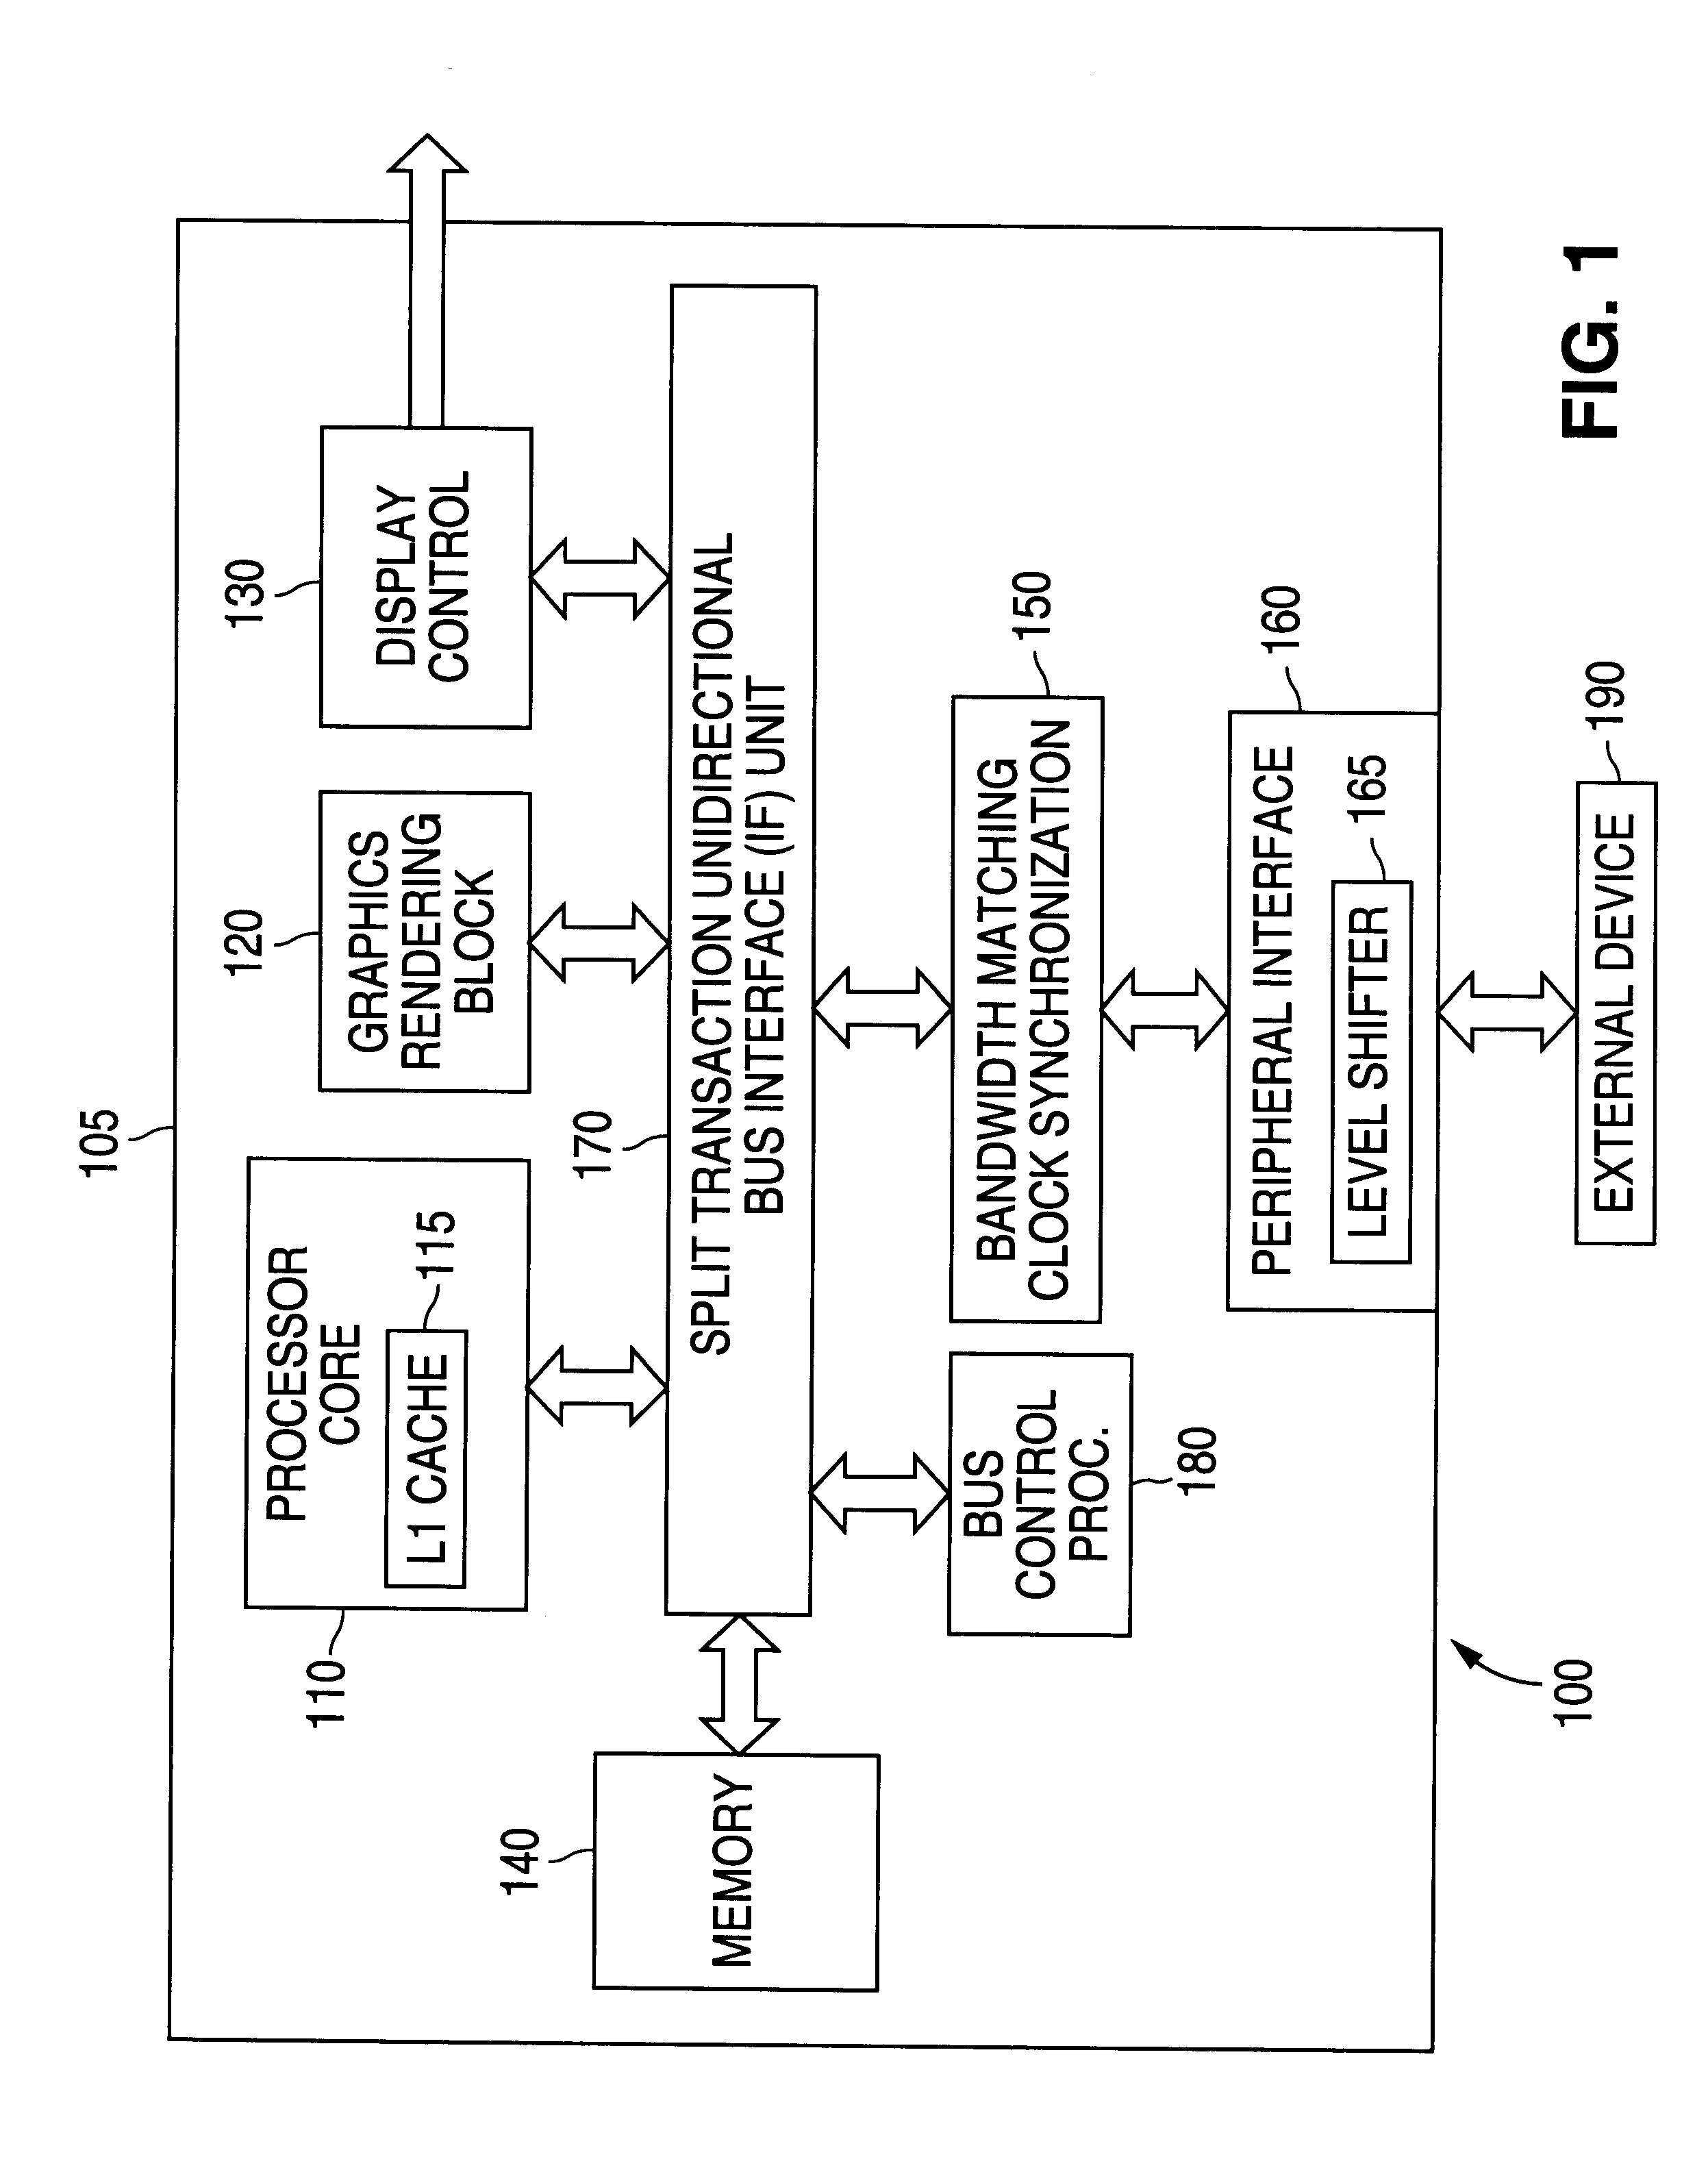 System for generating a reference voltage